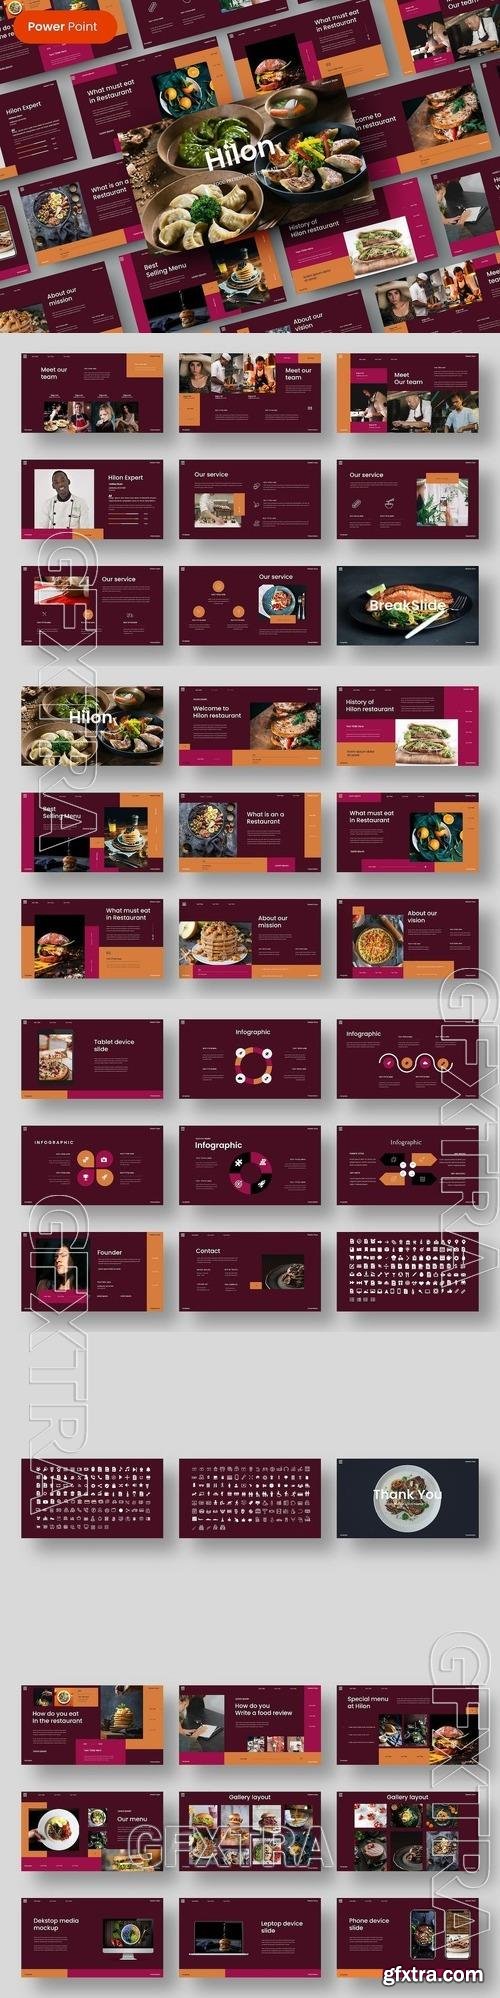 Hilon - Food Business PowerPoint Template 2MW532M